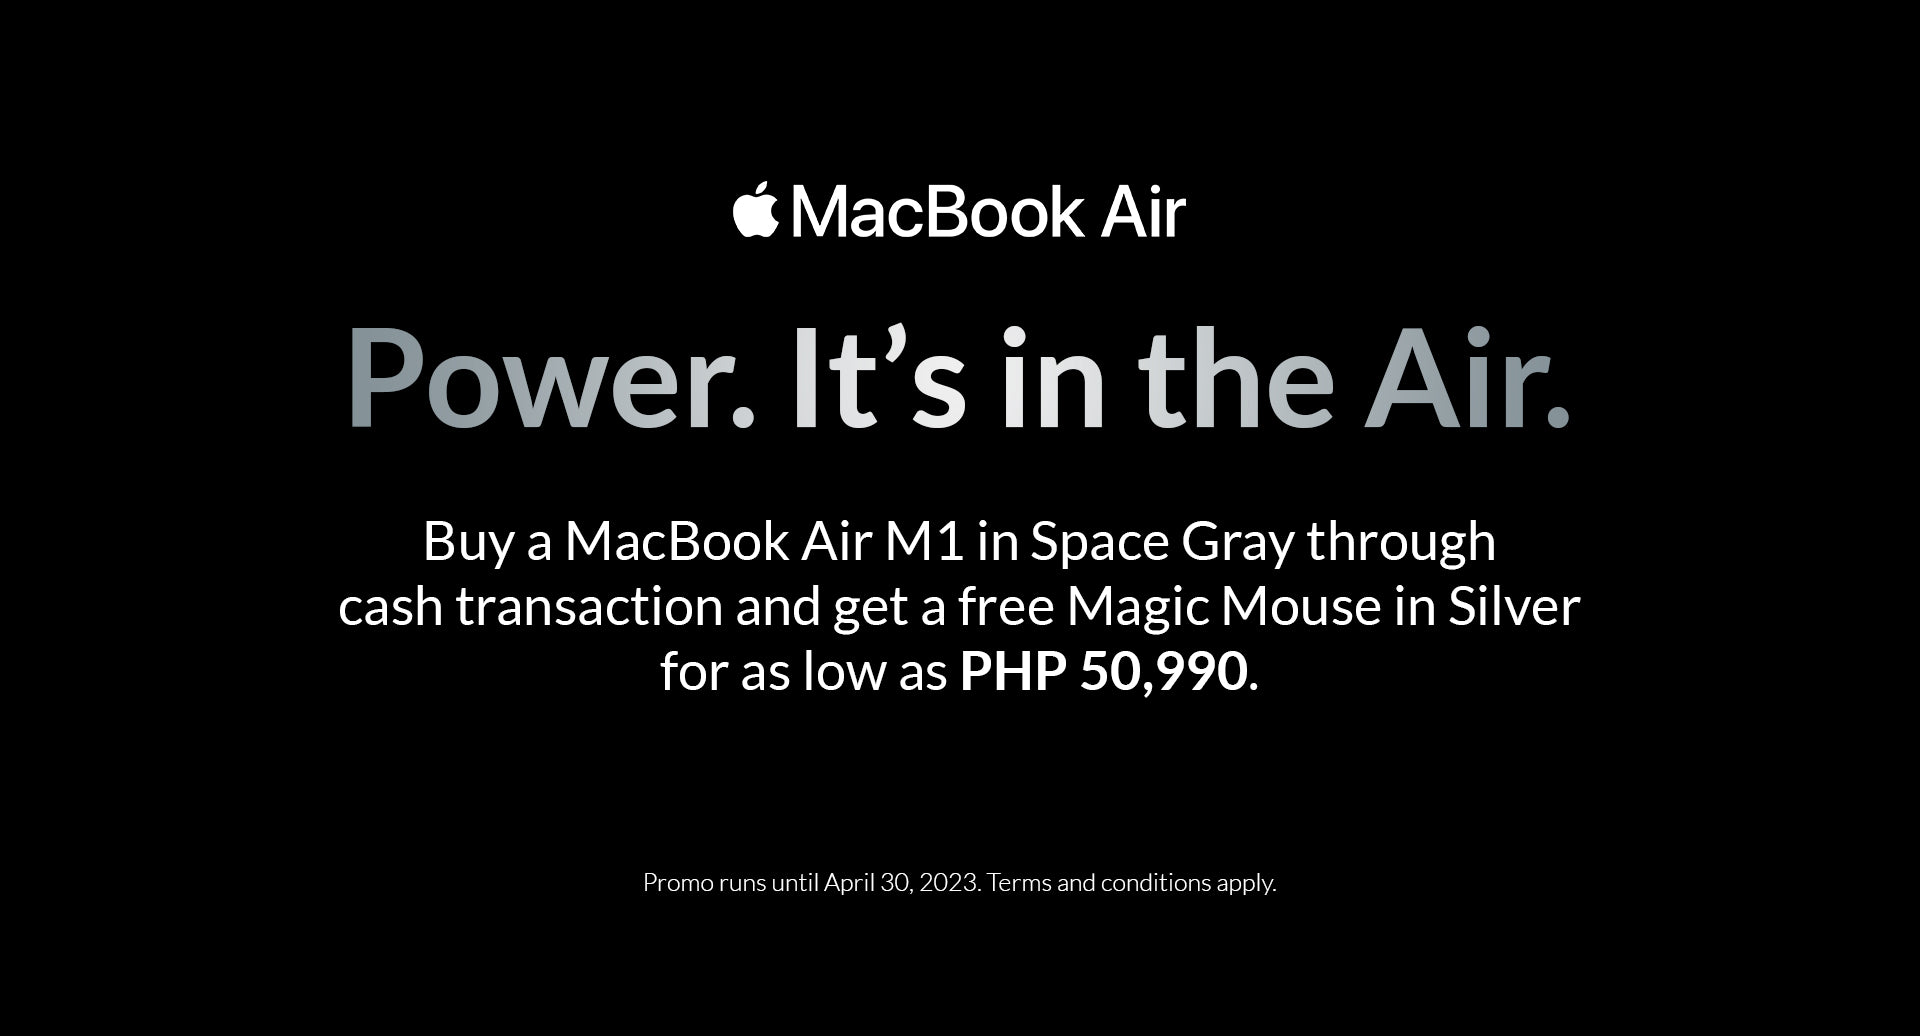 MacBook Air 13" M1 256GB + Magic Mouse Silver Bundle for as low as PHP 50,990!